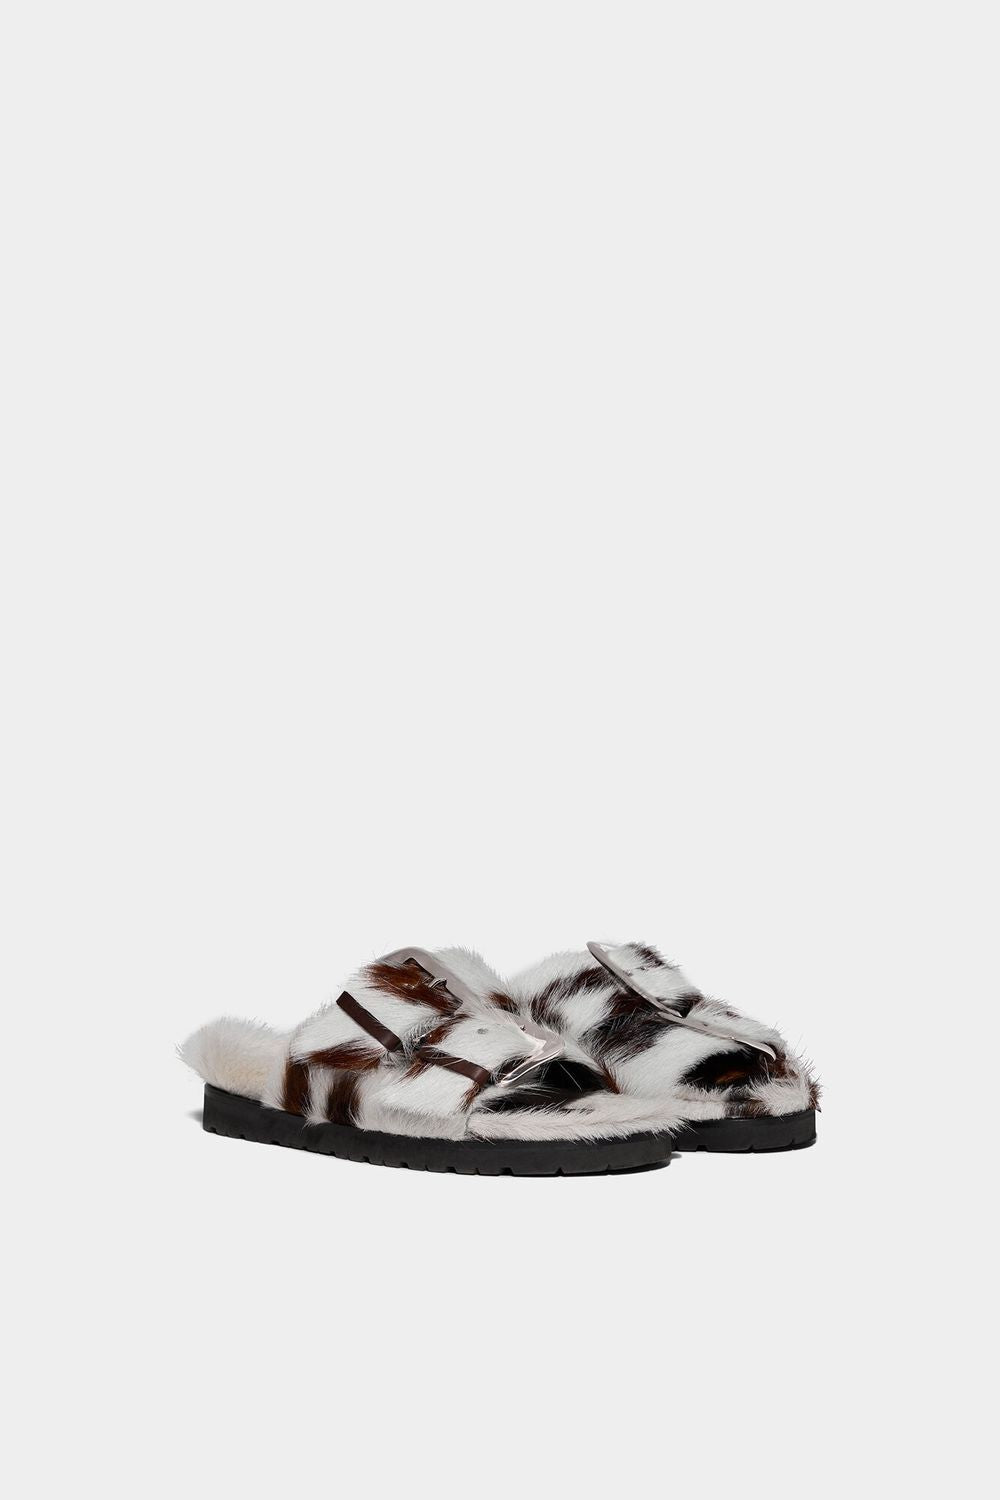 DSQUARED2 ROCK YOUR ROAD FLAT SANDALS